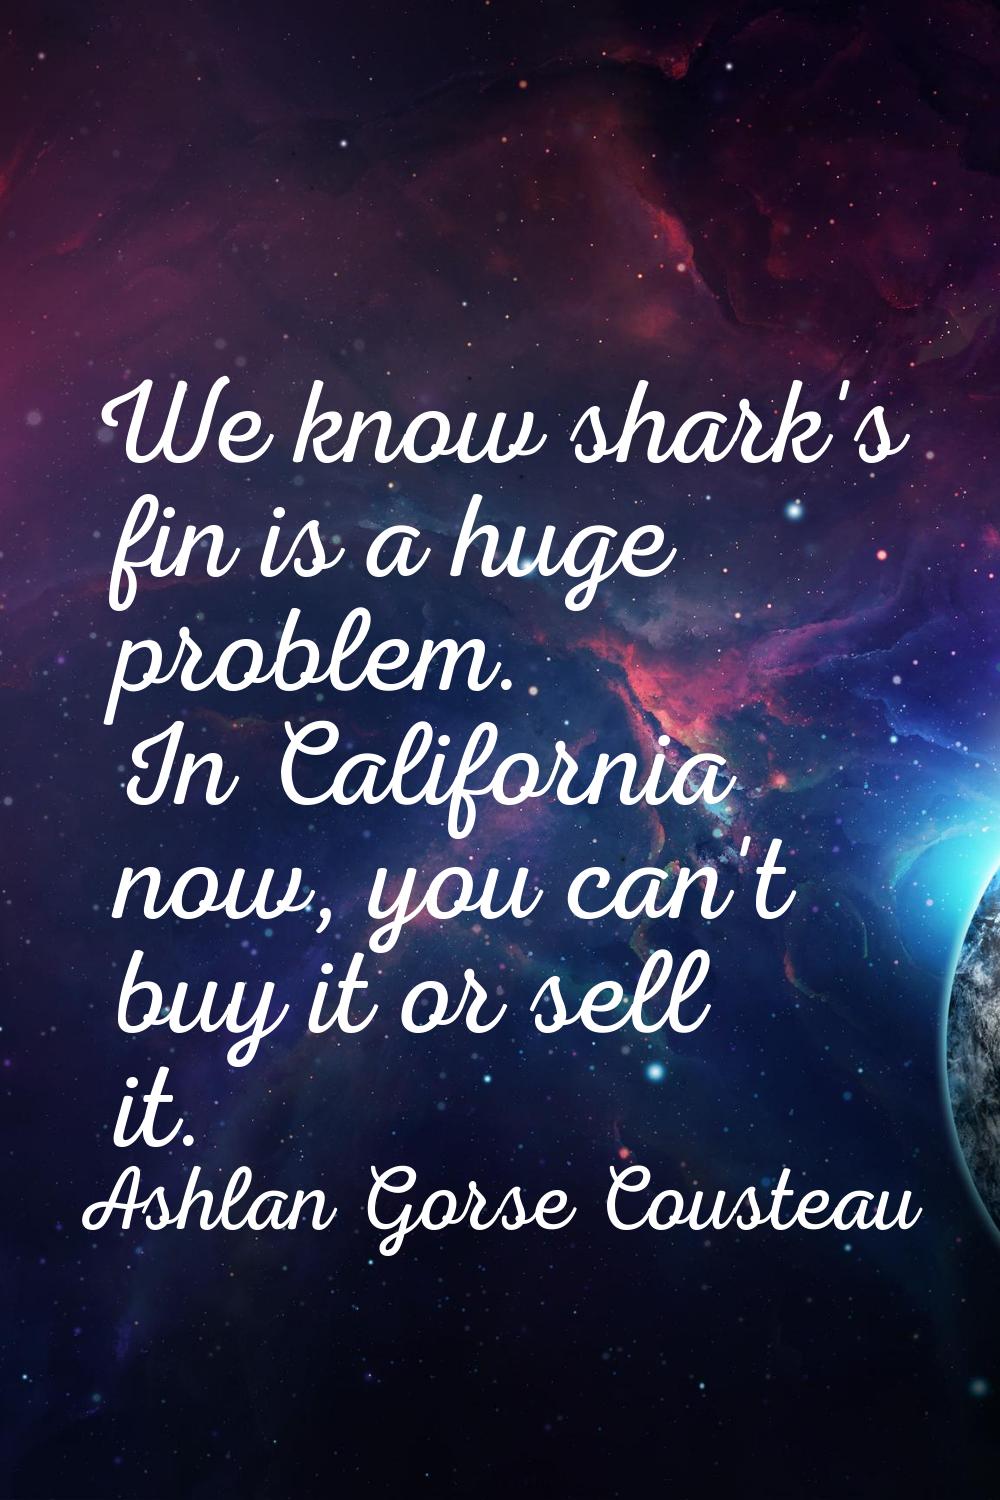 We know shark's fin is a huge problem. In California now, you can't buy it or sell it.